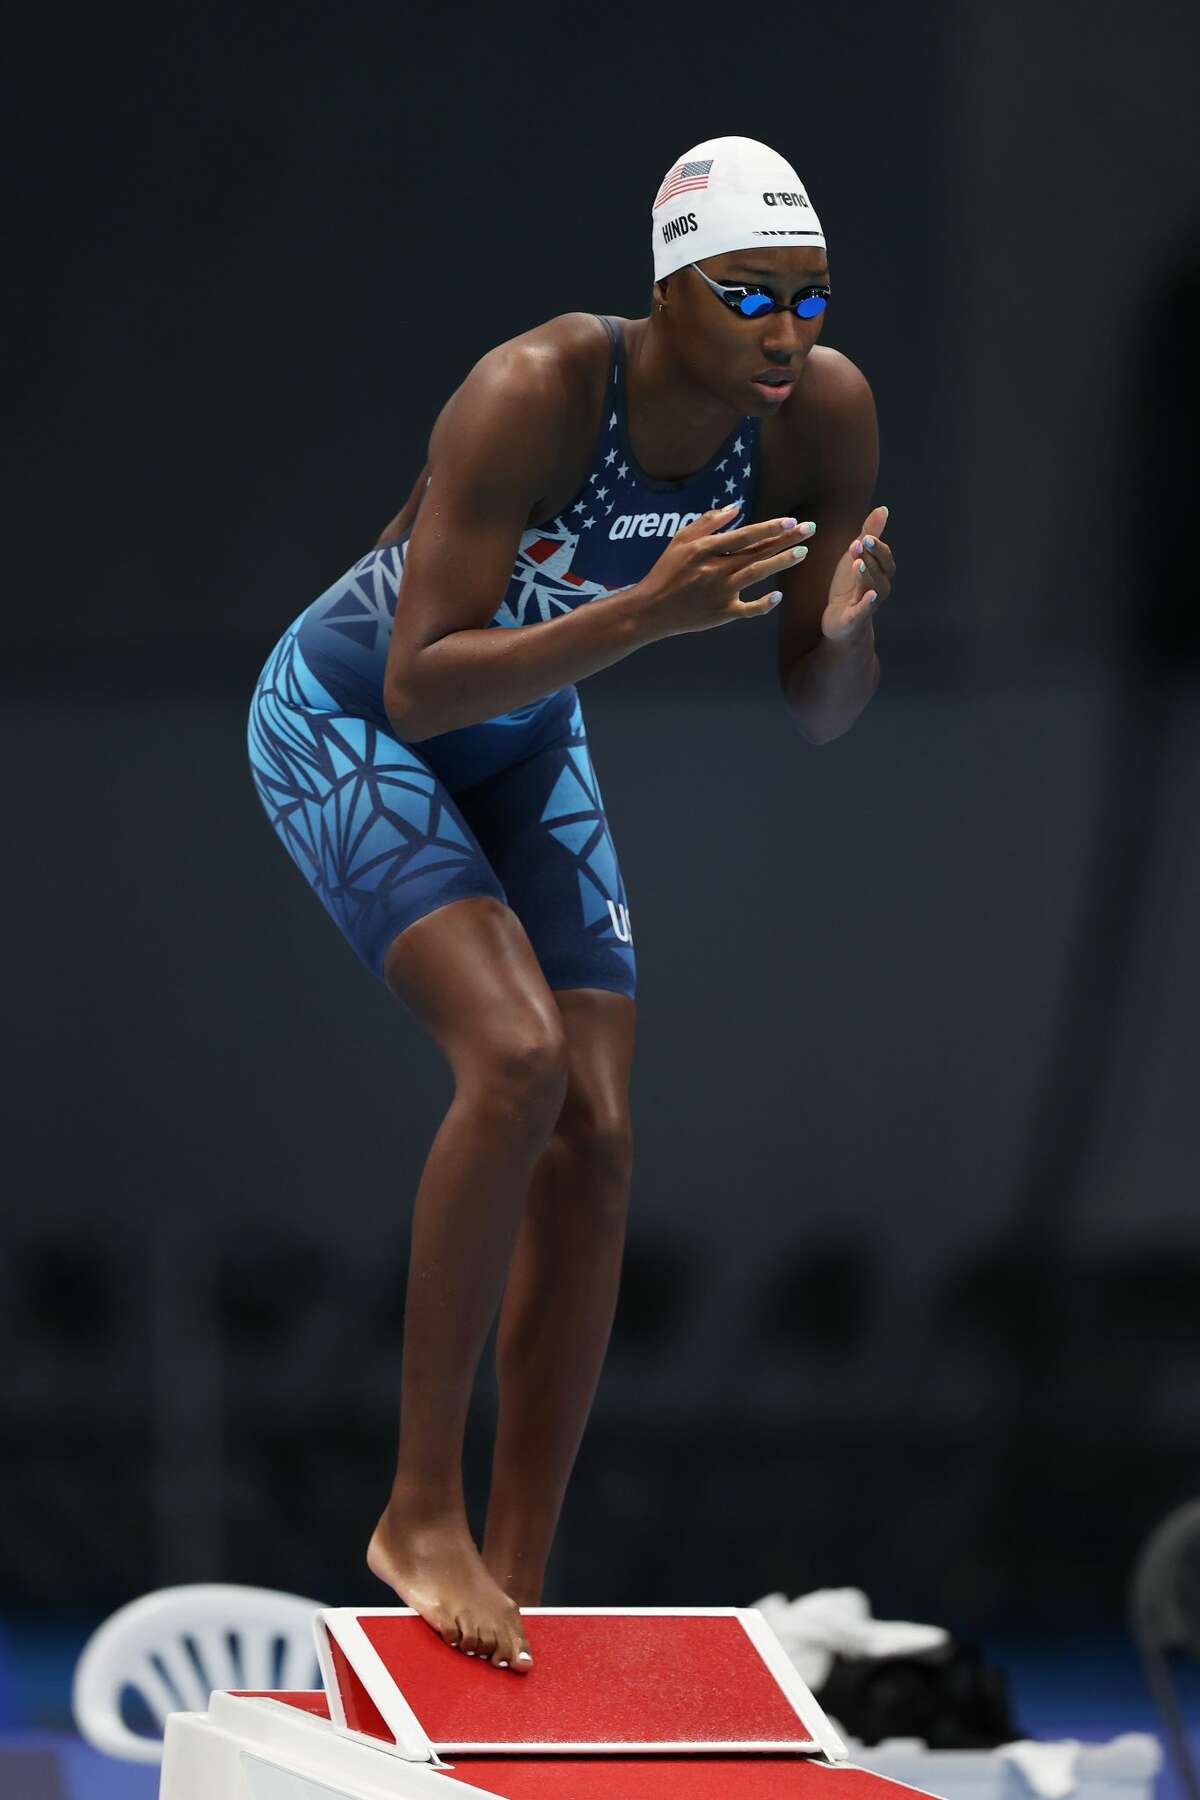 Natalie Hinds of Team United States prepares for heat one of the Women's 4 x 100m Freestyle Relay on day one of the Tokyo 2020 Olympic Games at Tokyo Aquatics Centre on July 24, 2021 in Tokyo, Japan. (Photo by Al Bello/Getty Images)